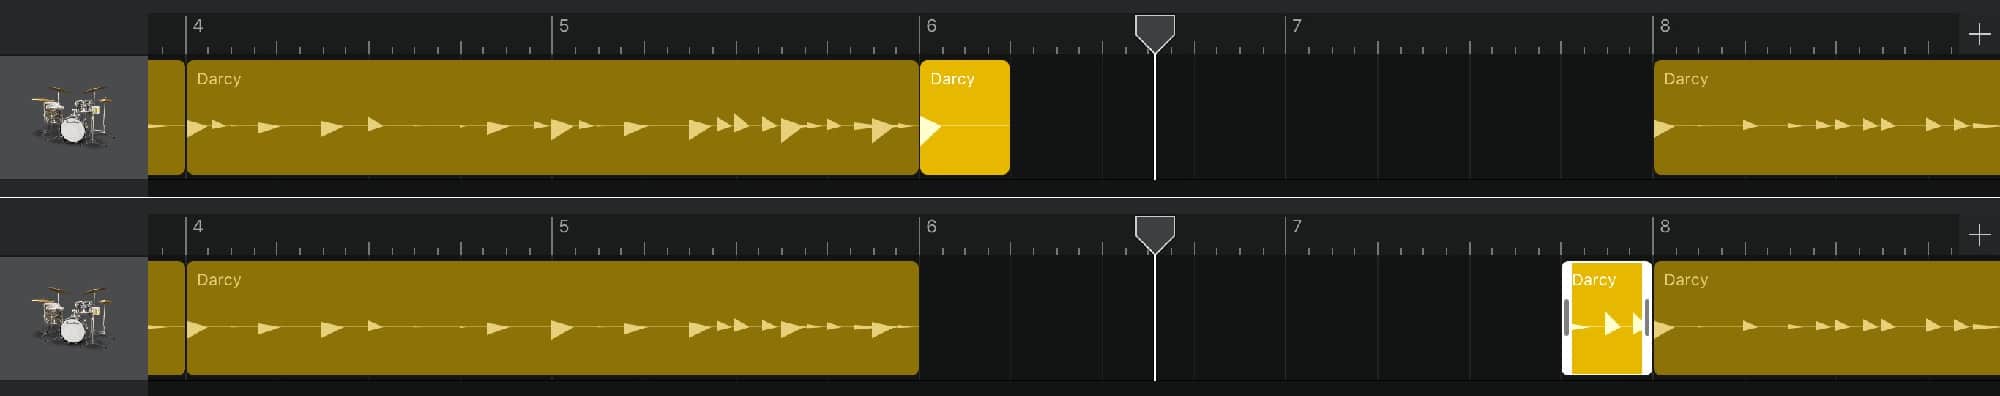 Drummer automatically makes your parts flow seamlessly together.